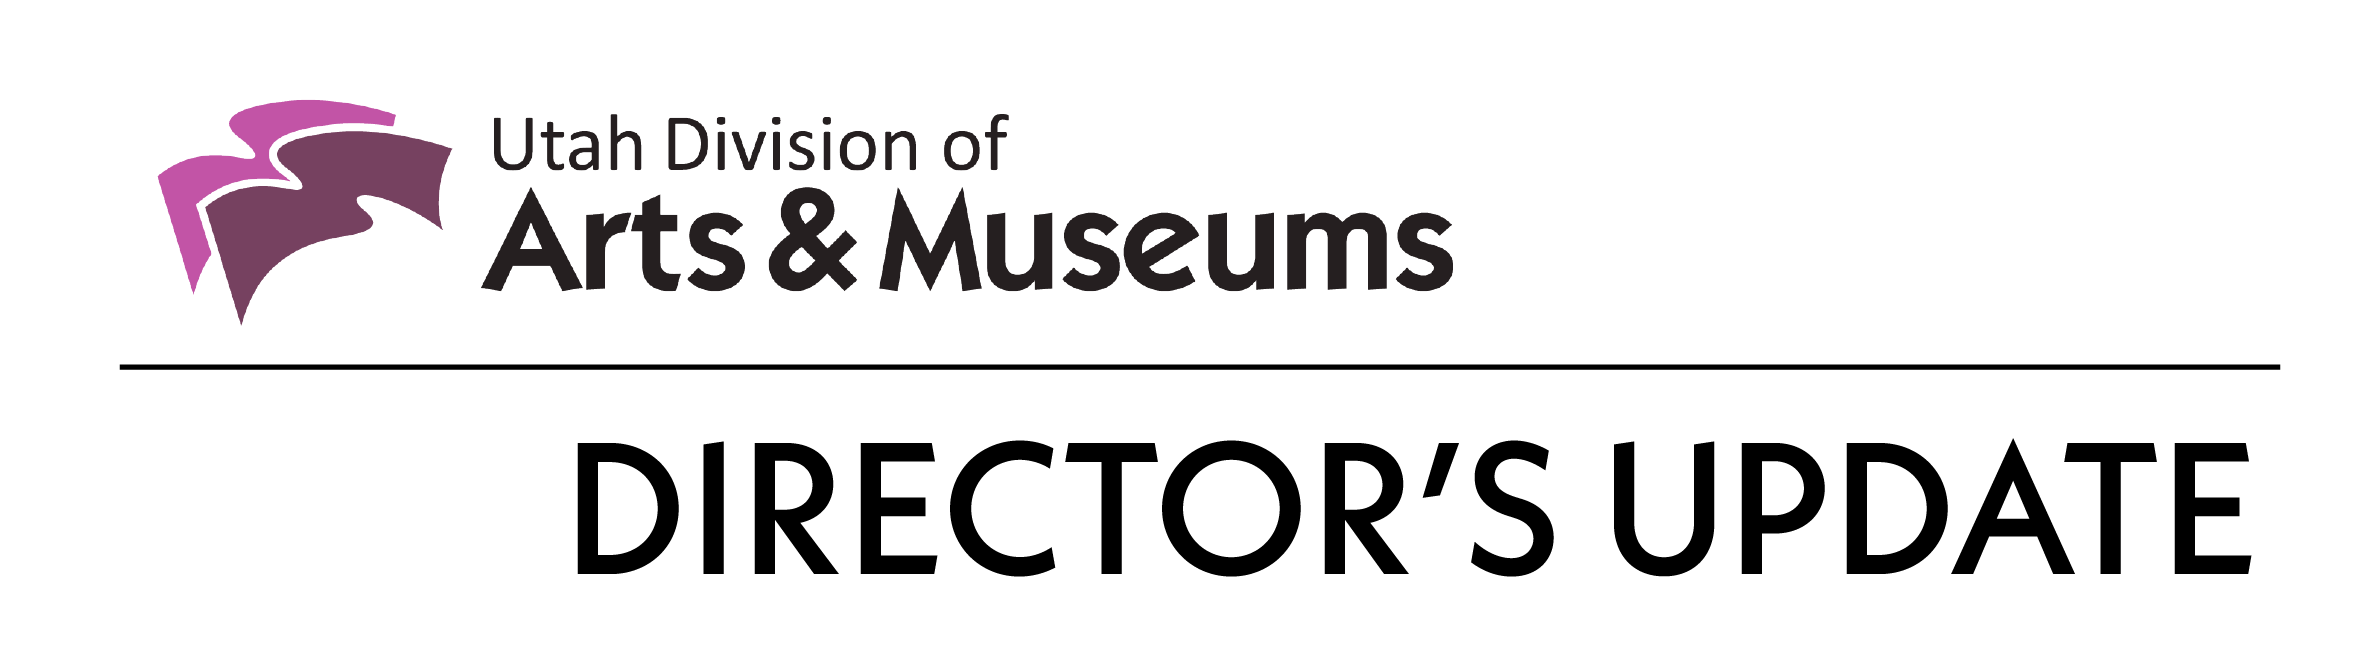 Utah Division of Arts and Museums. Director's Update.